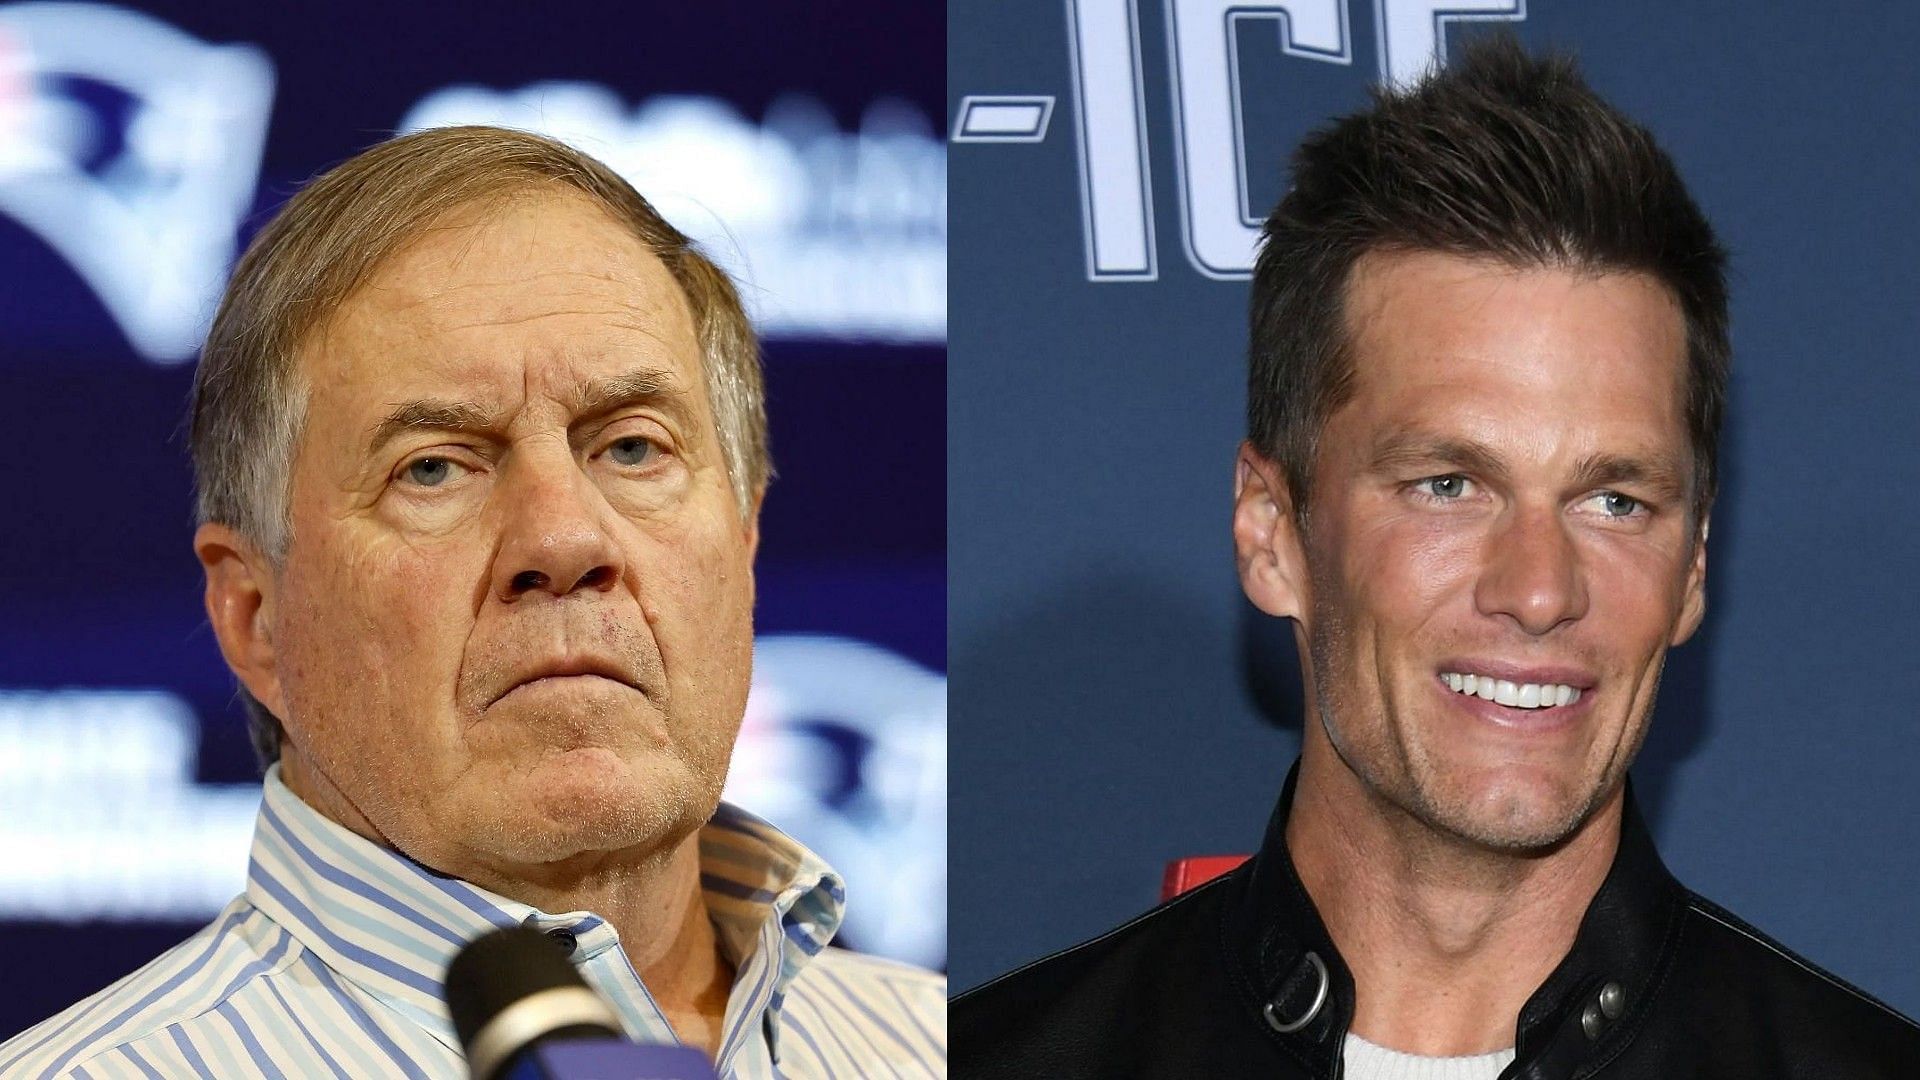 Patriots insider reports &ldquo;surreal&rdquo; atmosphere in Patriots building similar to Tom Brady&rsquo;s exit in leadup to Bill Belichick&rsquo;s goodbye press conference